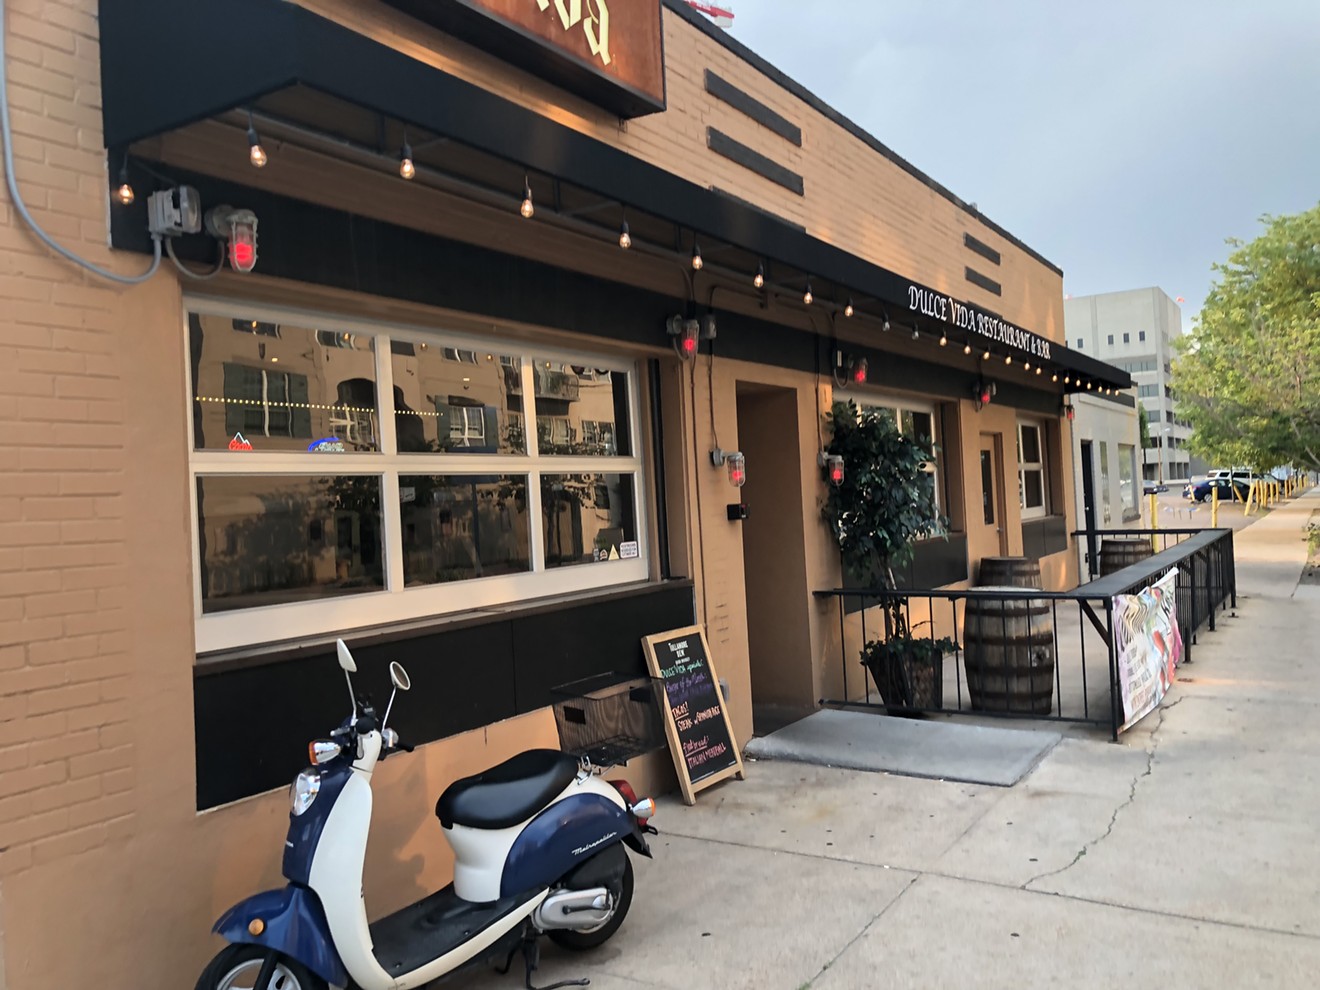 Dulce Vida, at 1201 Cherokee Street, is nestled in the Golden Triangle neighborhood outside of downtown.